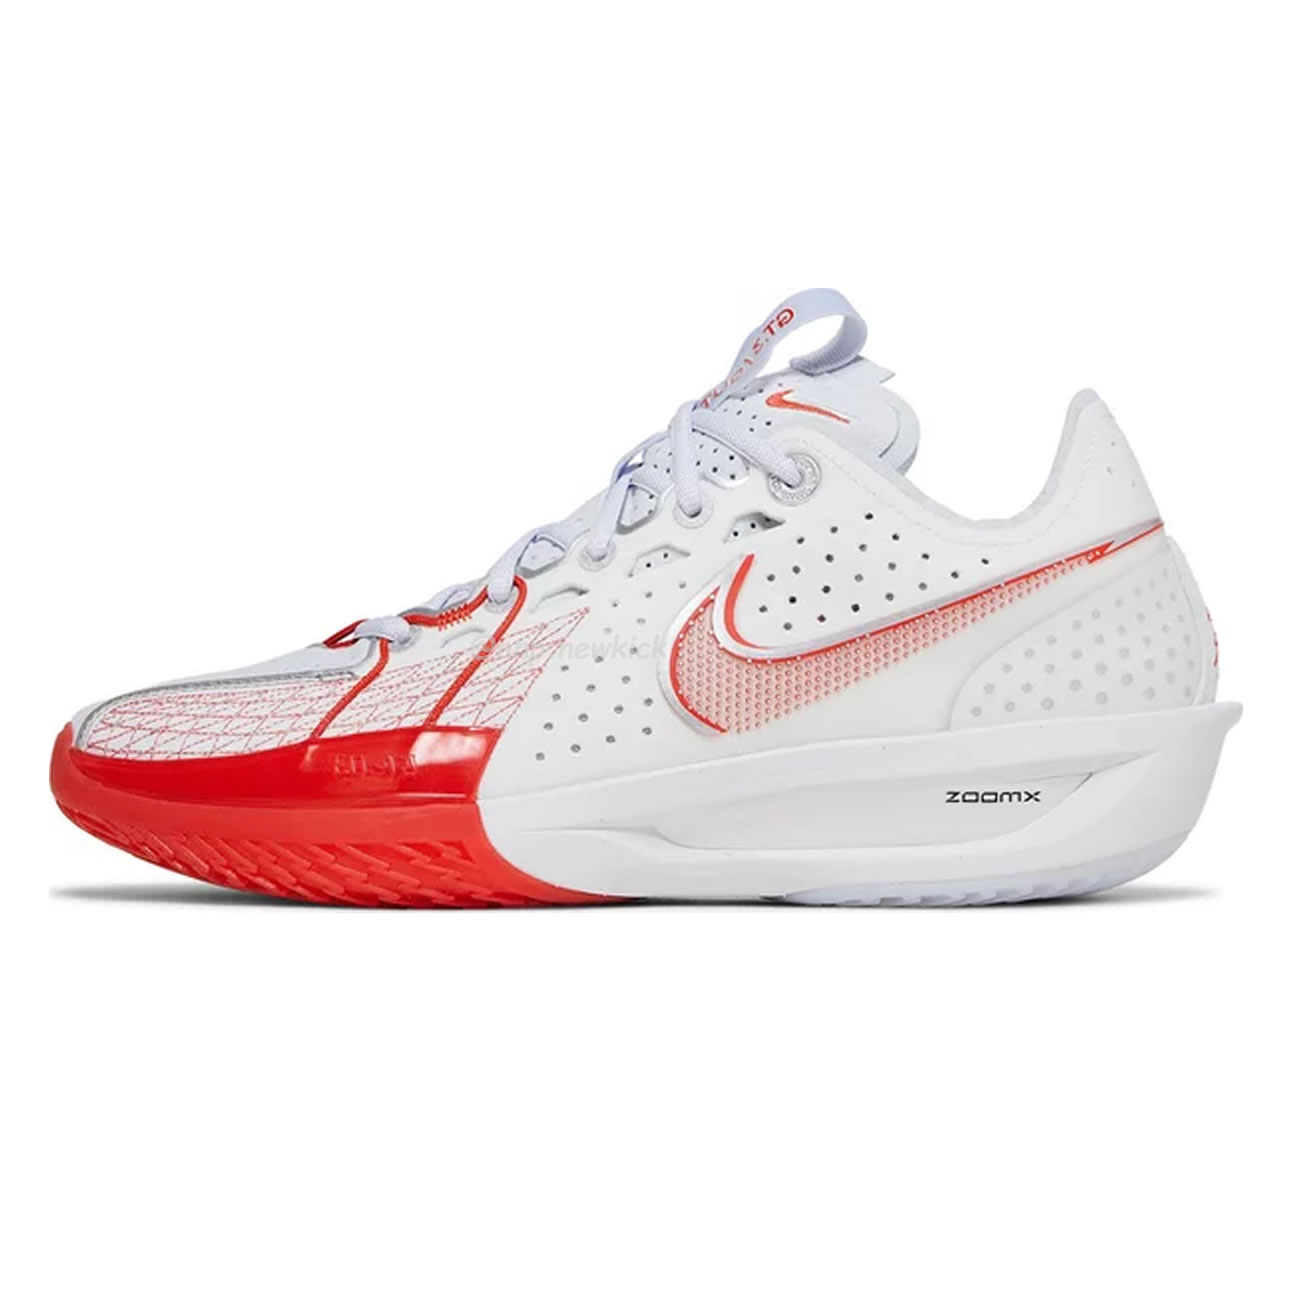 Nike Zoom Gt Cut 3 Be True To Her School White Picante Red Vapor Green University Think Pink (9) - newkick.org